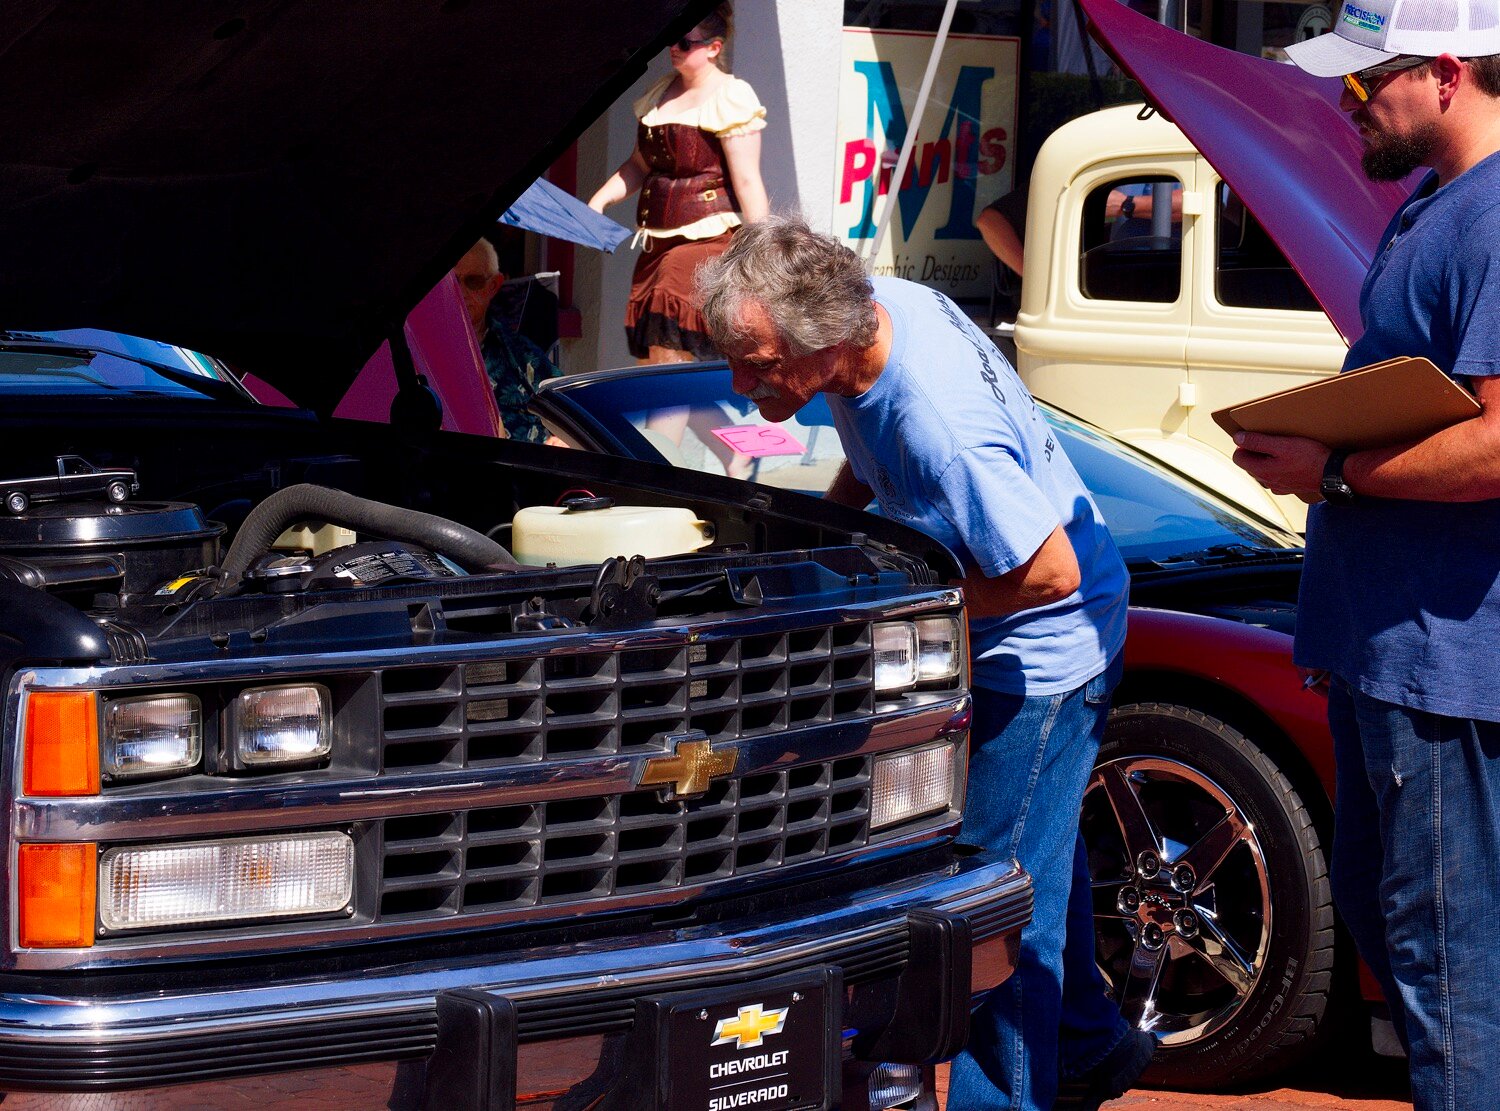 A judge takes a look under the hood of a Chevy Silverado. [additional iron horse images available]